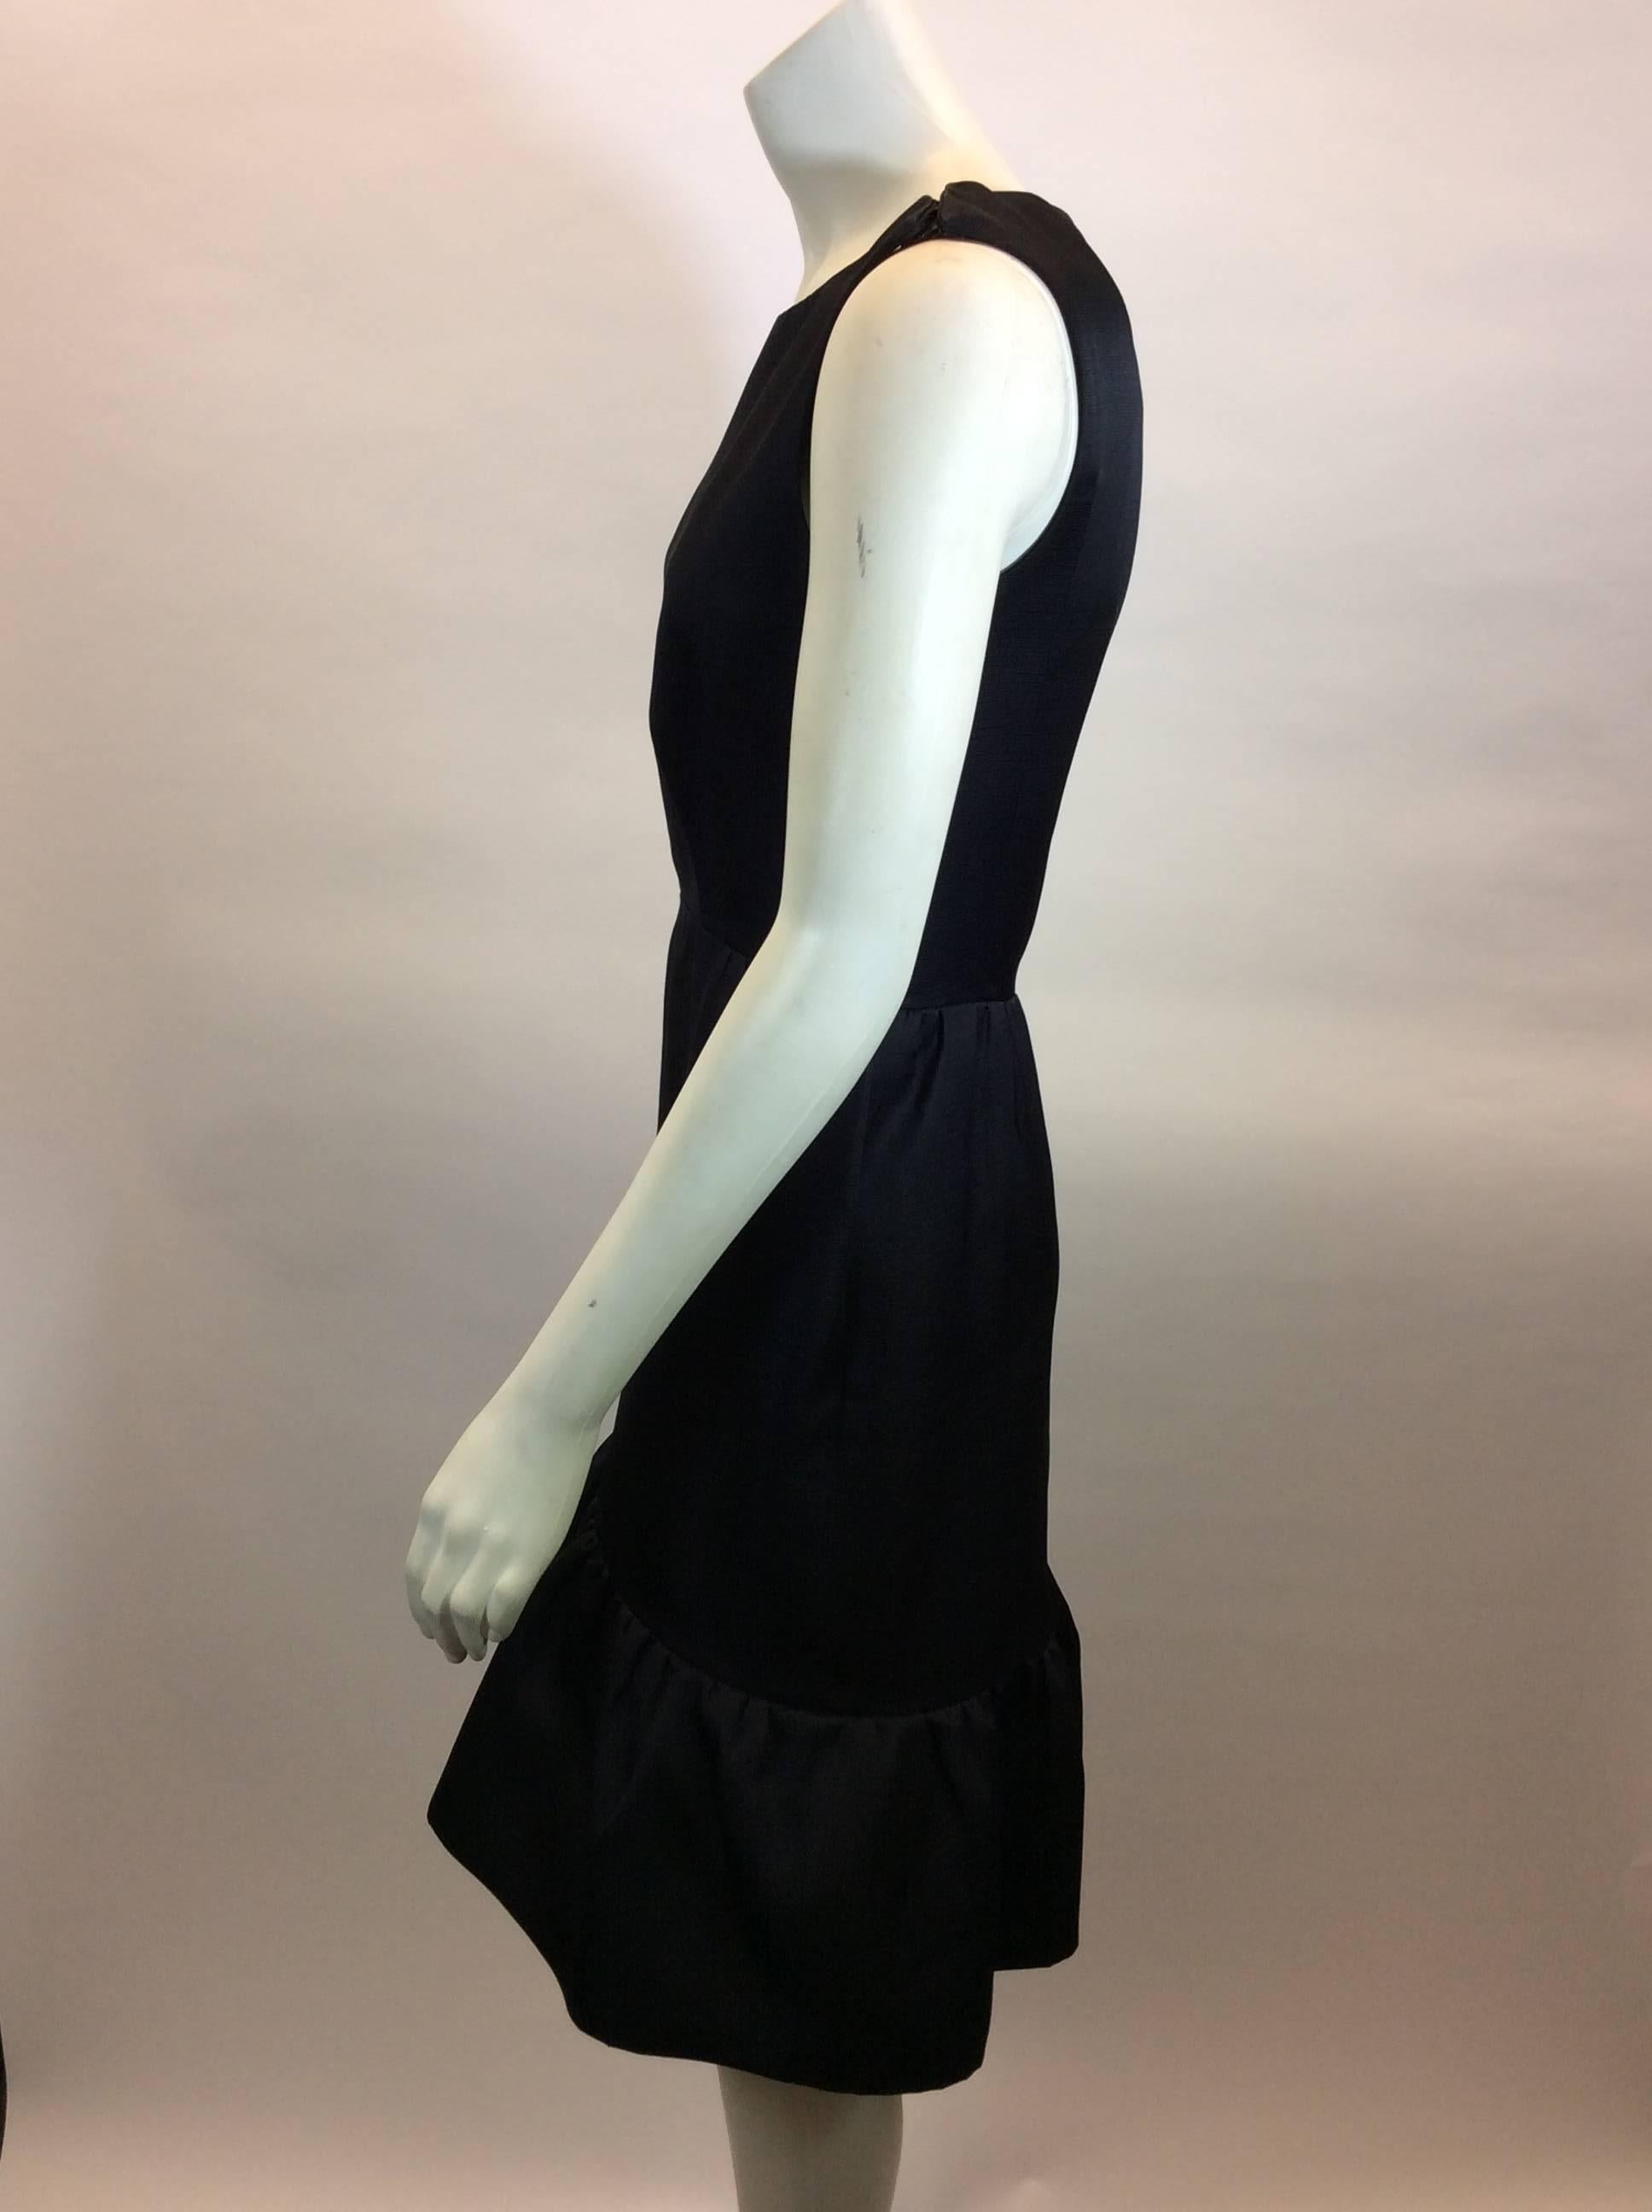 Black Flounce Sleeveless Dress
Features decorative hook and eye closures on left shoulder seam
Side seam zipper closure
Size 38 (equates to US 6)
100% Silk